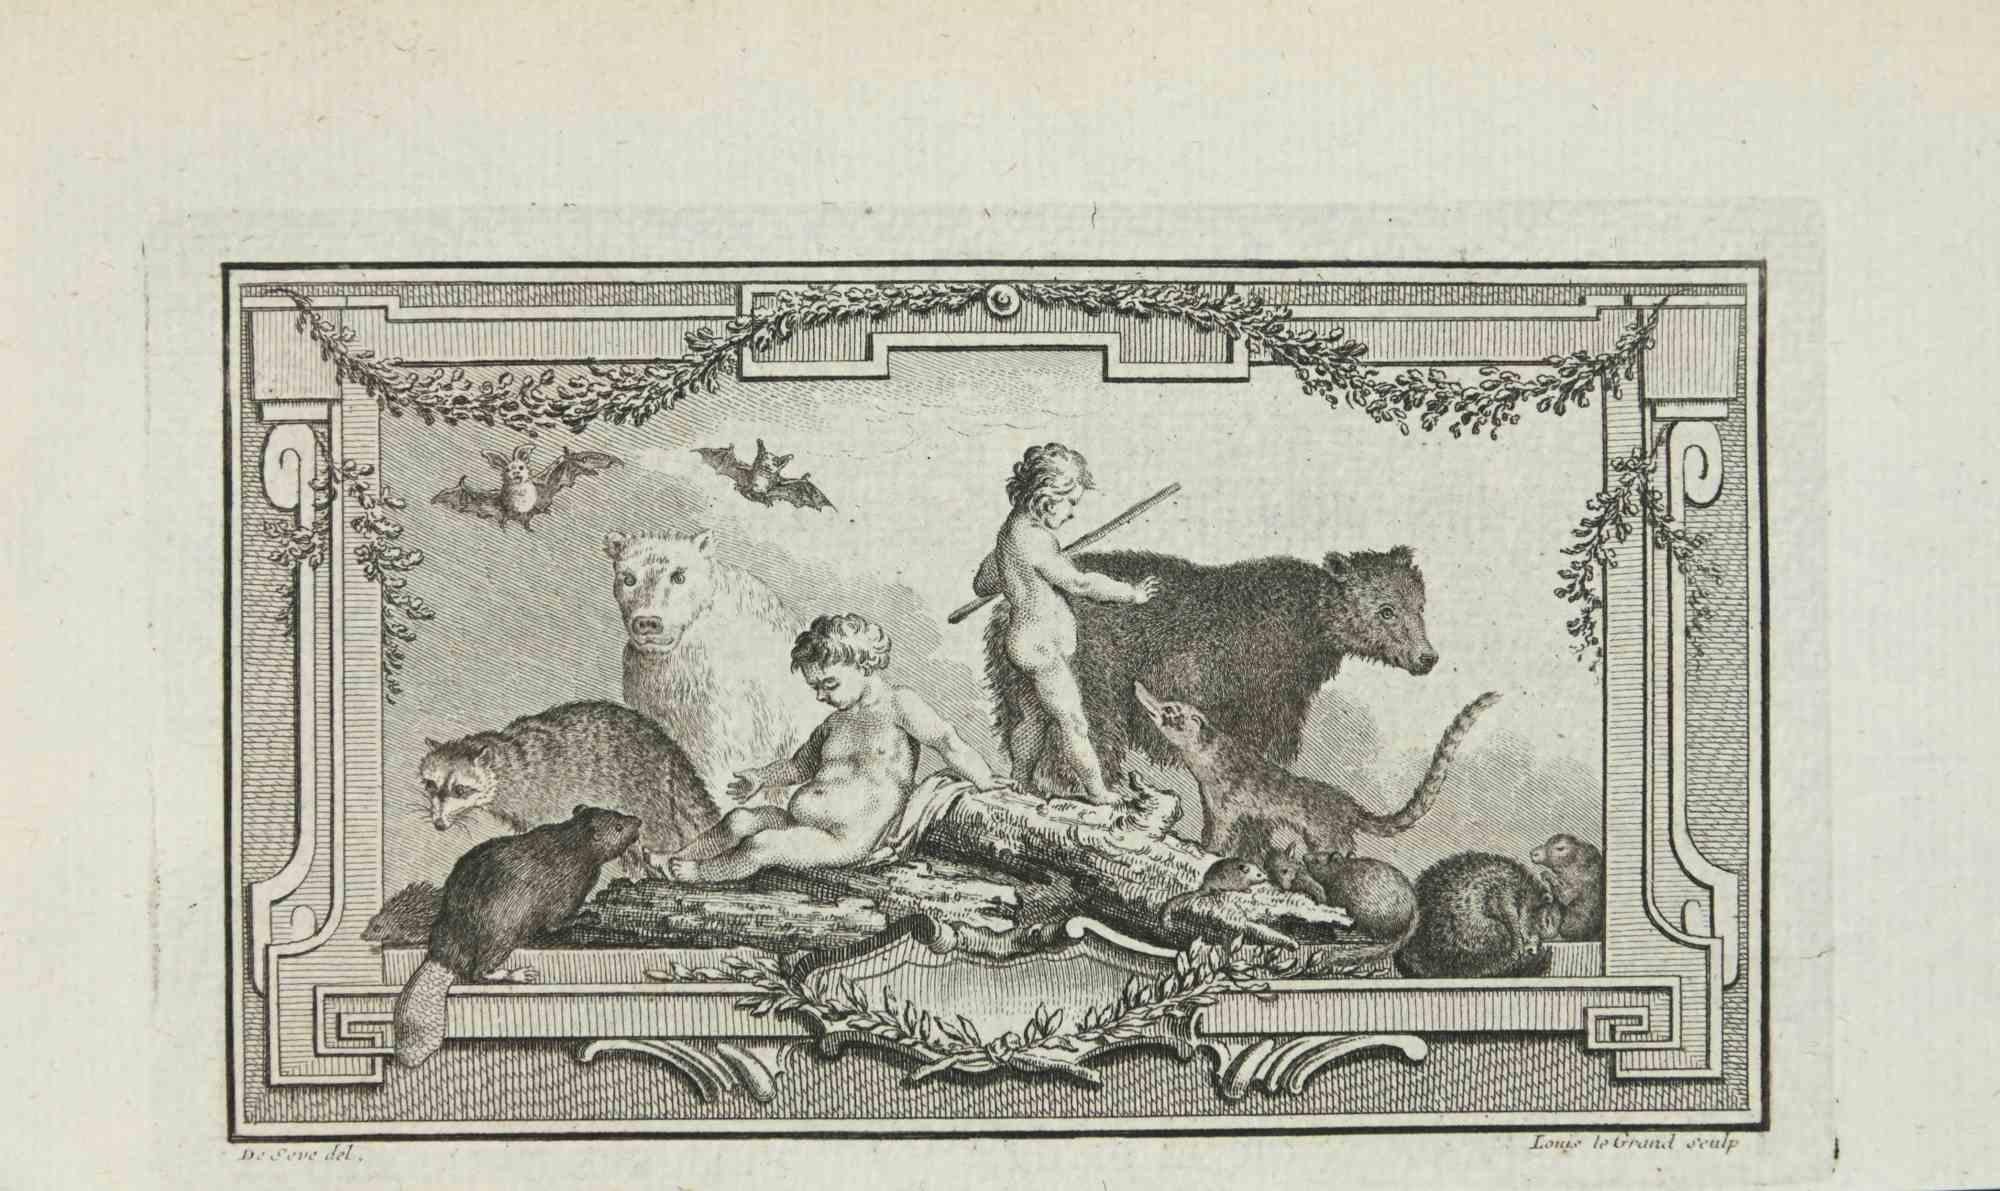 Composition with Animals is an etching realized in 1771 by Louis Legrand (1723-1807).

The Artwork is depicted through confident strokes in aa well balanced composition.

Good conditions.
